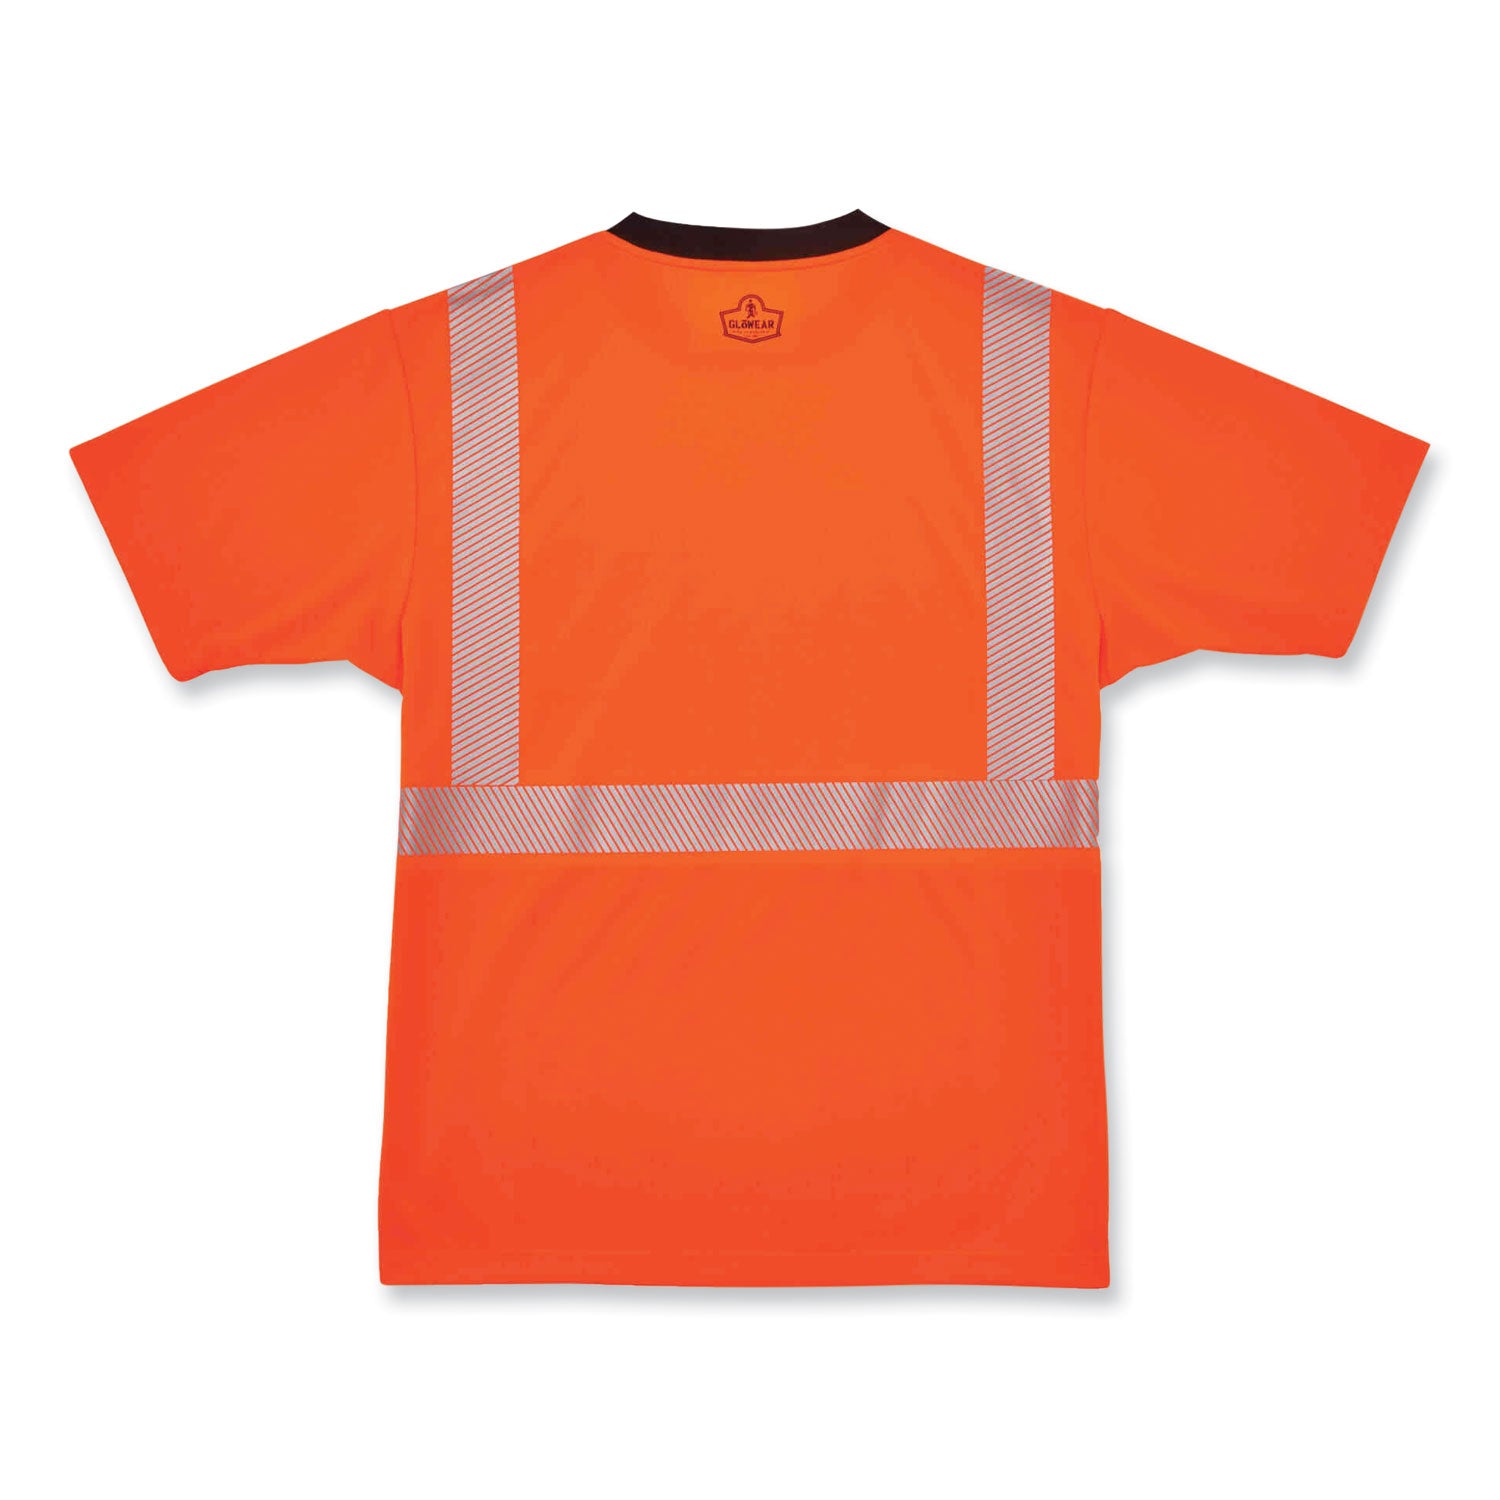 glowear-8280bk-class-2-performance-t-shirt-with-black-bottom-polyester-3x-large-orange-ships-in-1-3-business-days_ego22587 - 3